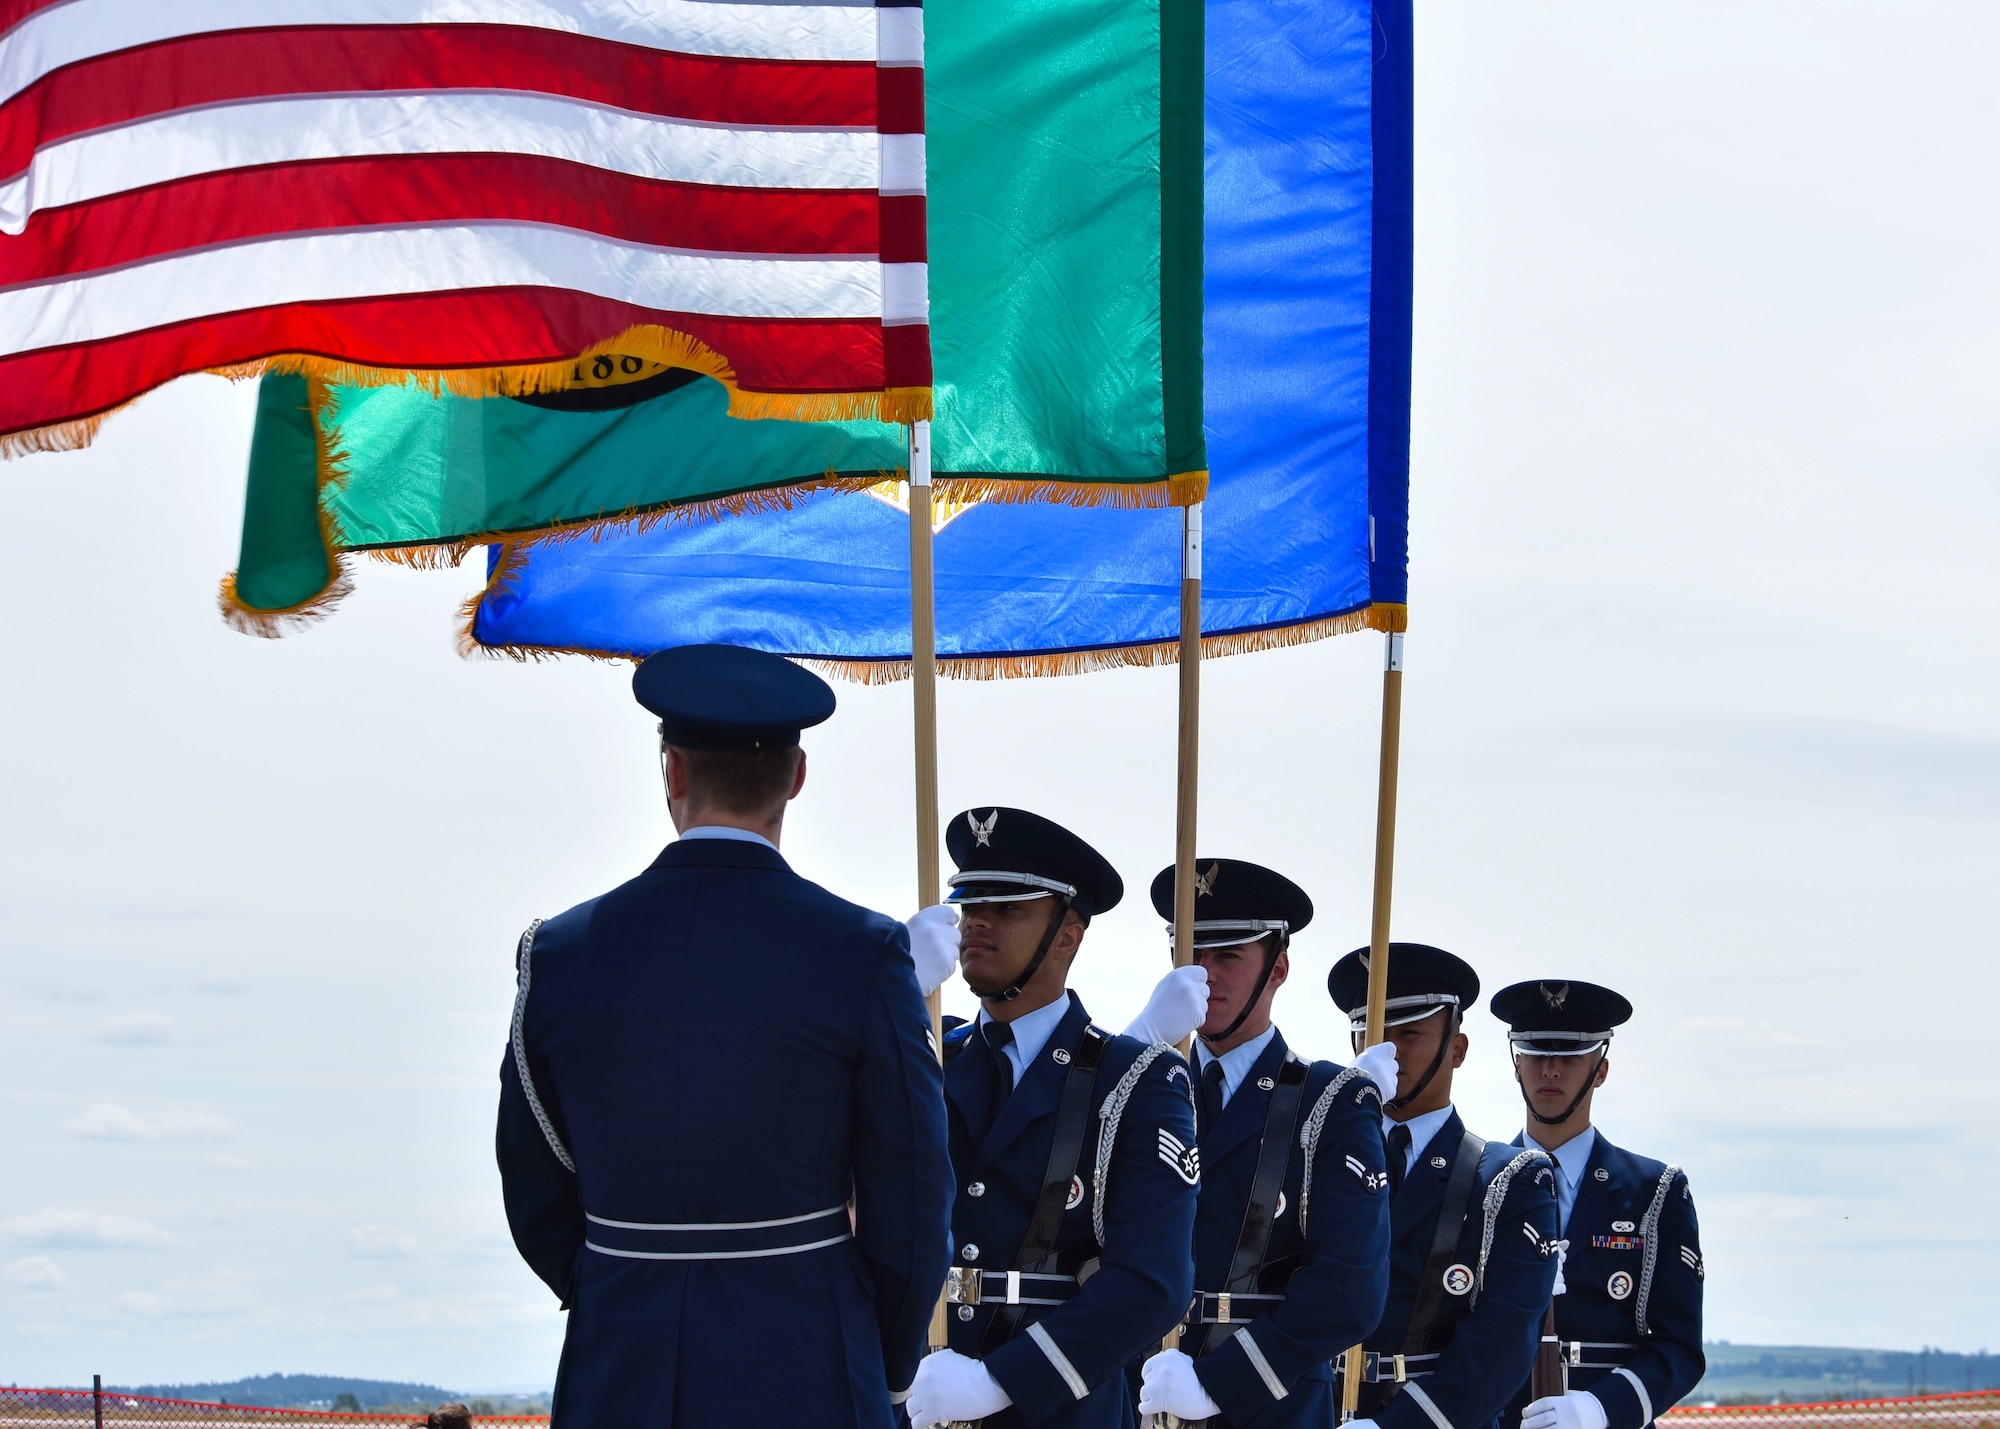 U.S. Air Force Honor Guard members wait to post colors during the 2019 Skyfest Open House and Airshow on Fairchild Air Force Base, Washington, June 22, 2019. Skyfest 2019 offered a unique view of Team Fairchild’s role in enabling Rapid Global Mobility for the U.S. Air Force. The show featured more than 13 aerial acts and 16 static display aircraft, as well as other attractions and displays. (U.S. Air Force photo by Airman Kiaundra Miller)